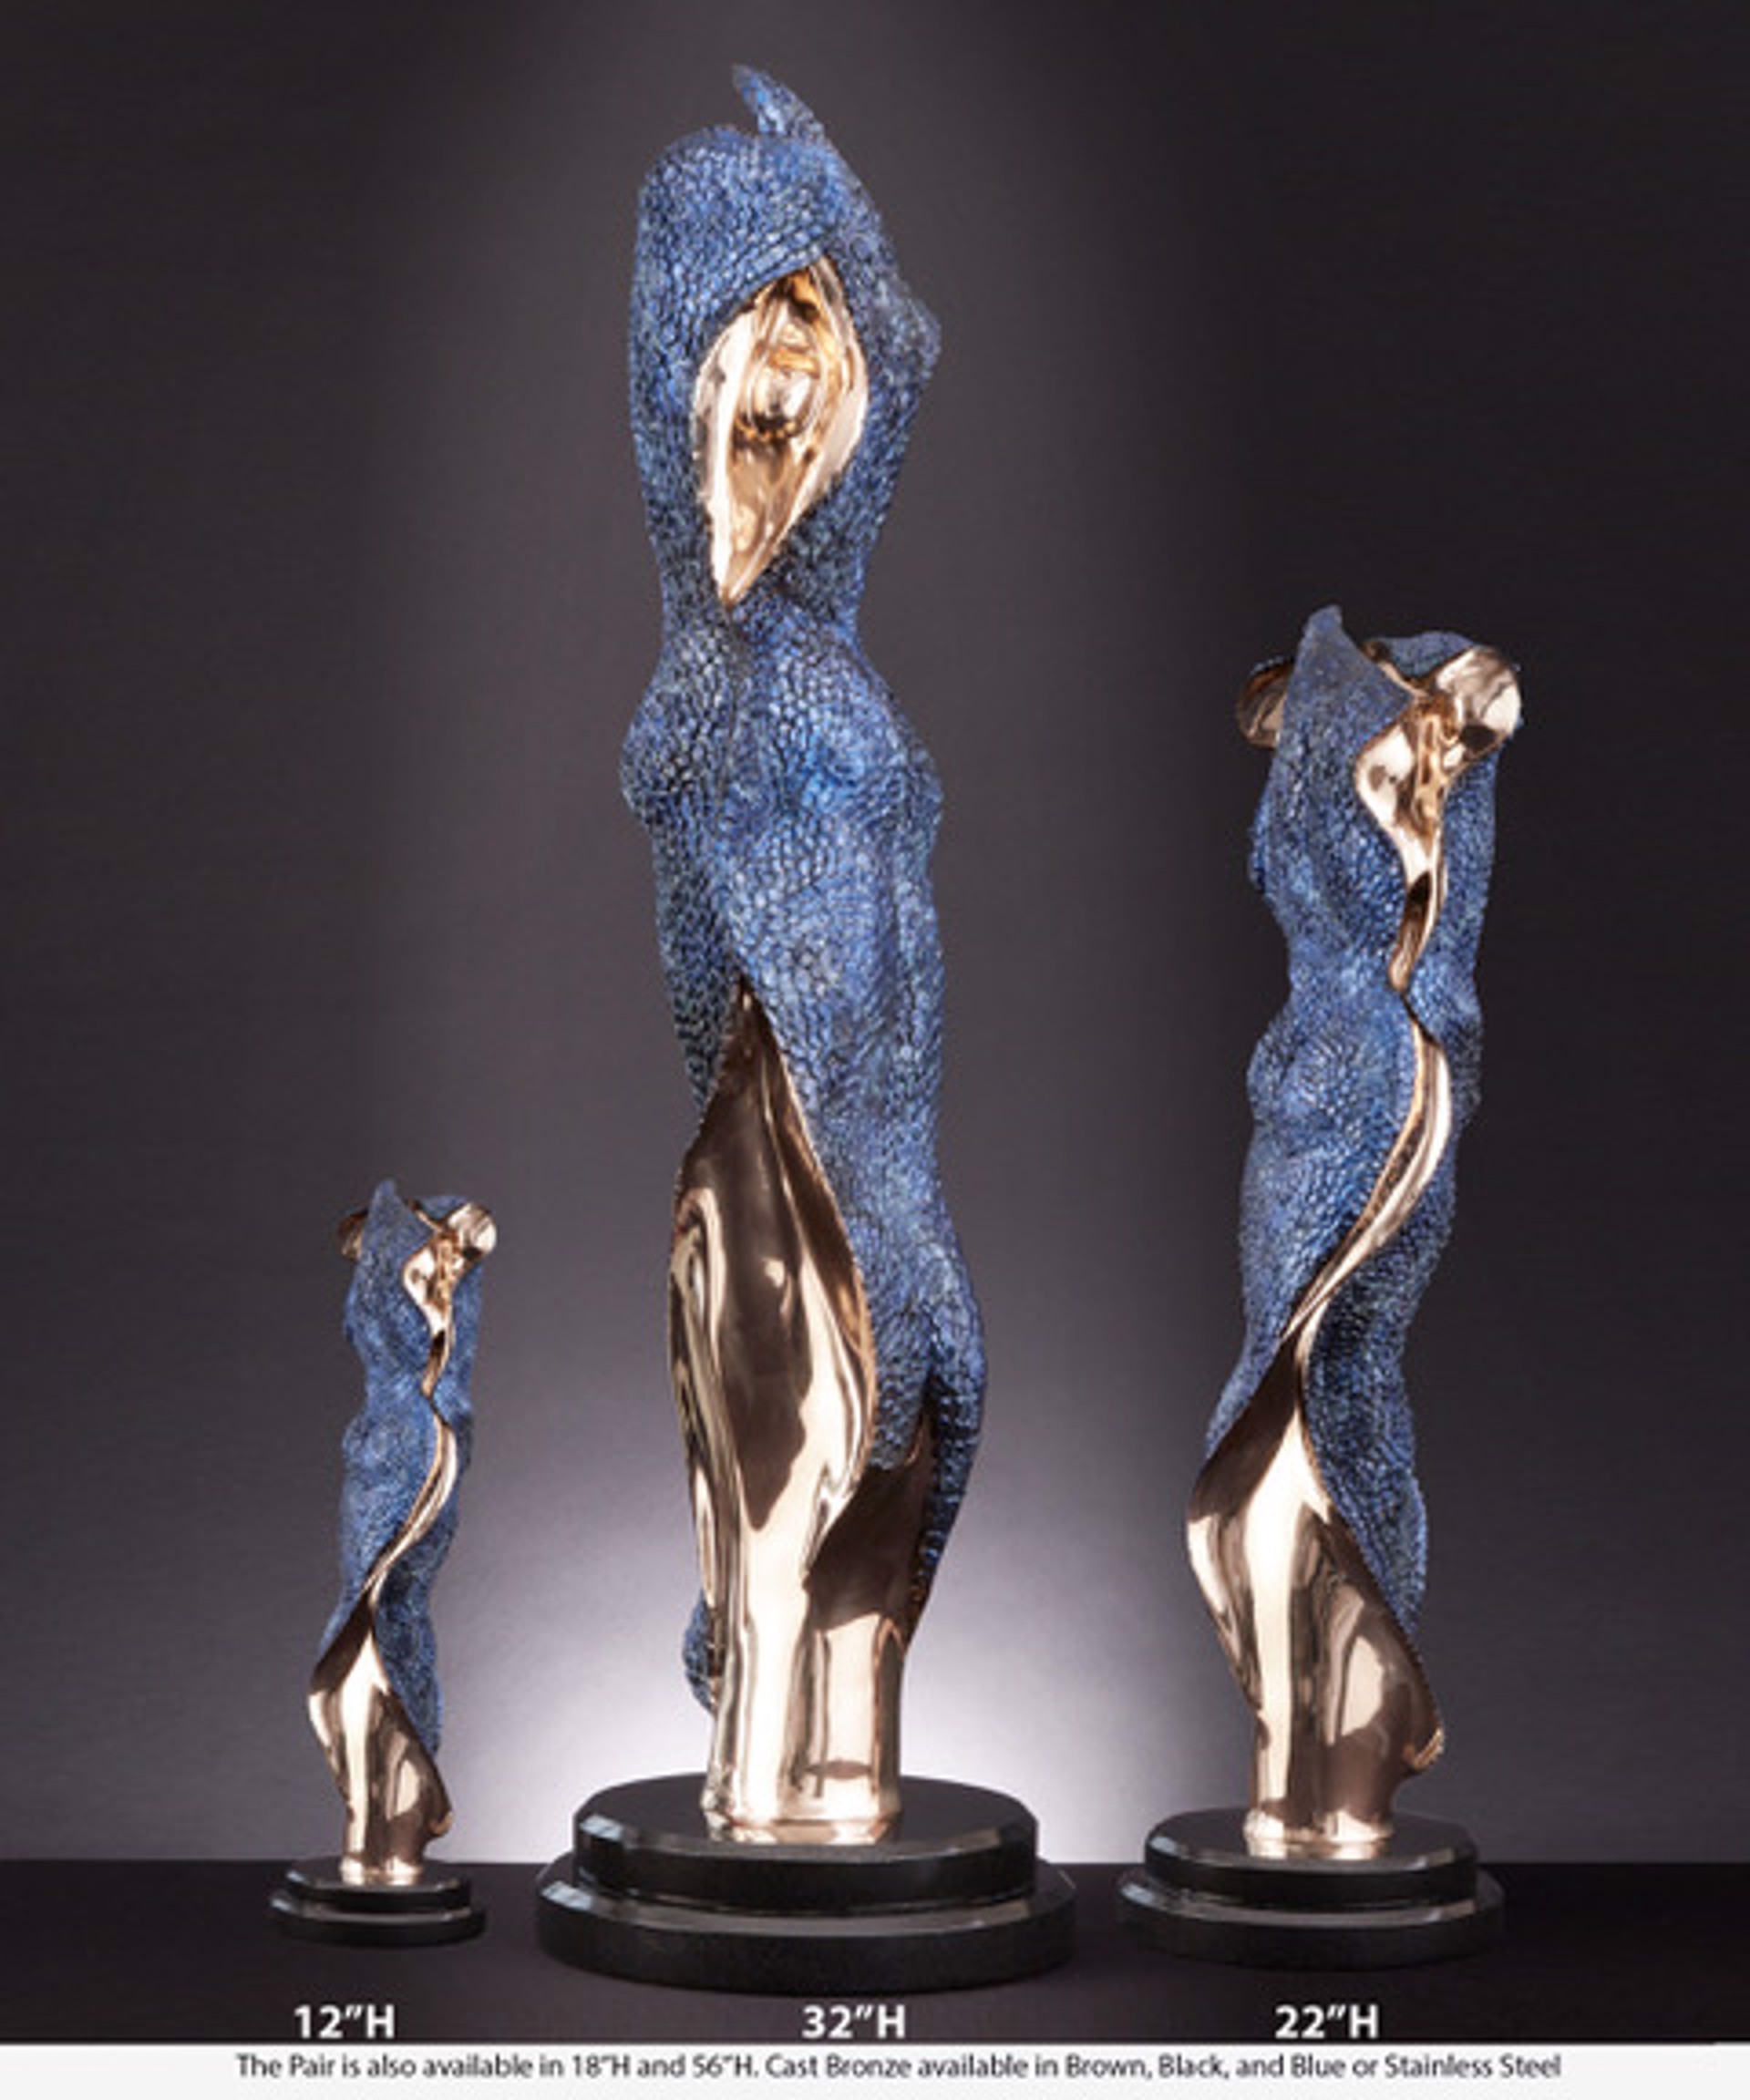 The Pair 32" Bronze with blue patina by Barbara Nagel